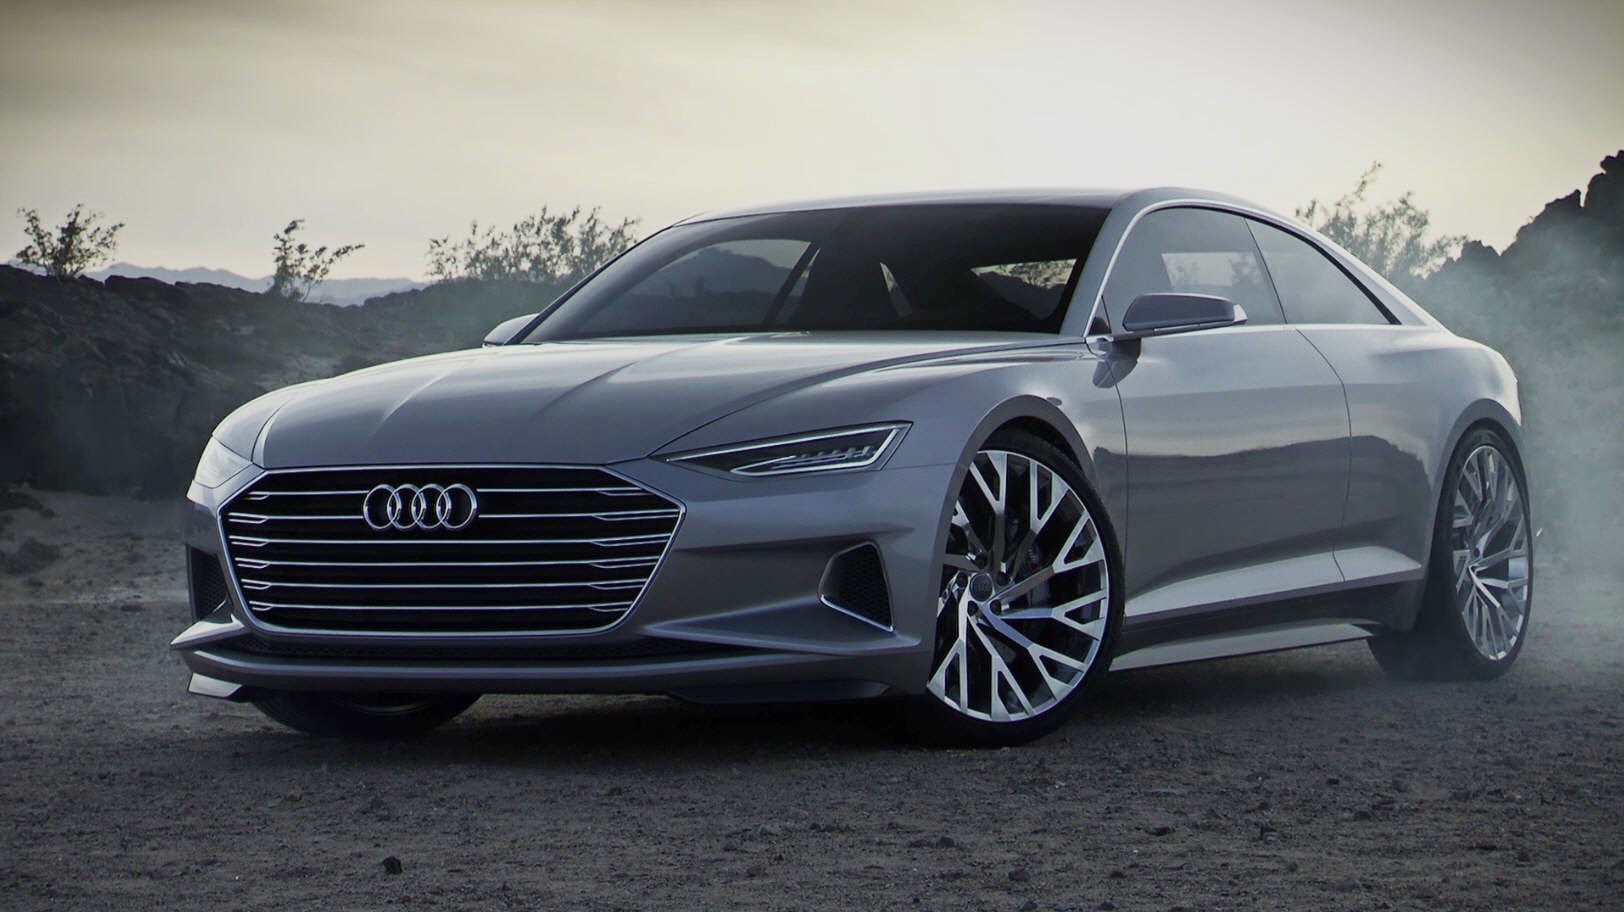 2018 Audi S8 Will Have 580 HP, New A8 W12 Coming With More Torque -  autoevolution